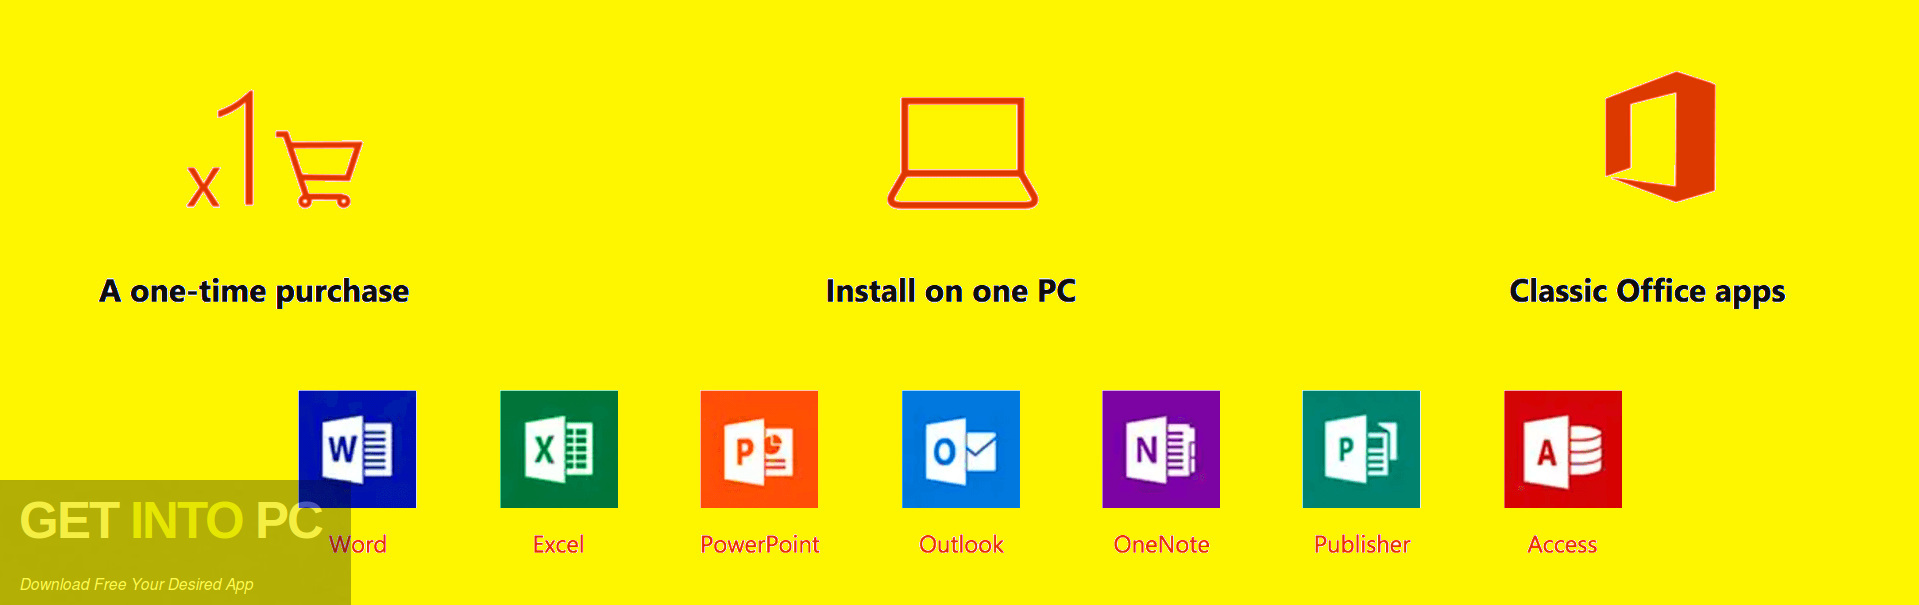 Office Professional Plus 2019 Updated July 2019 Latest Version Download-GetintoPC.com